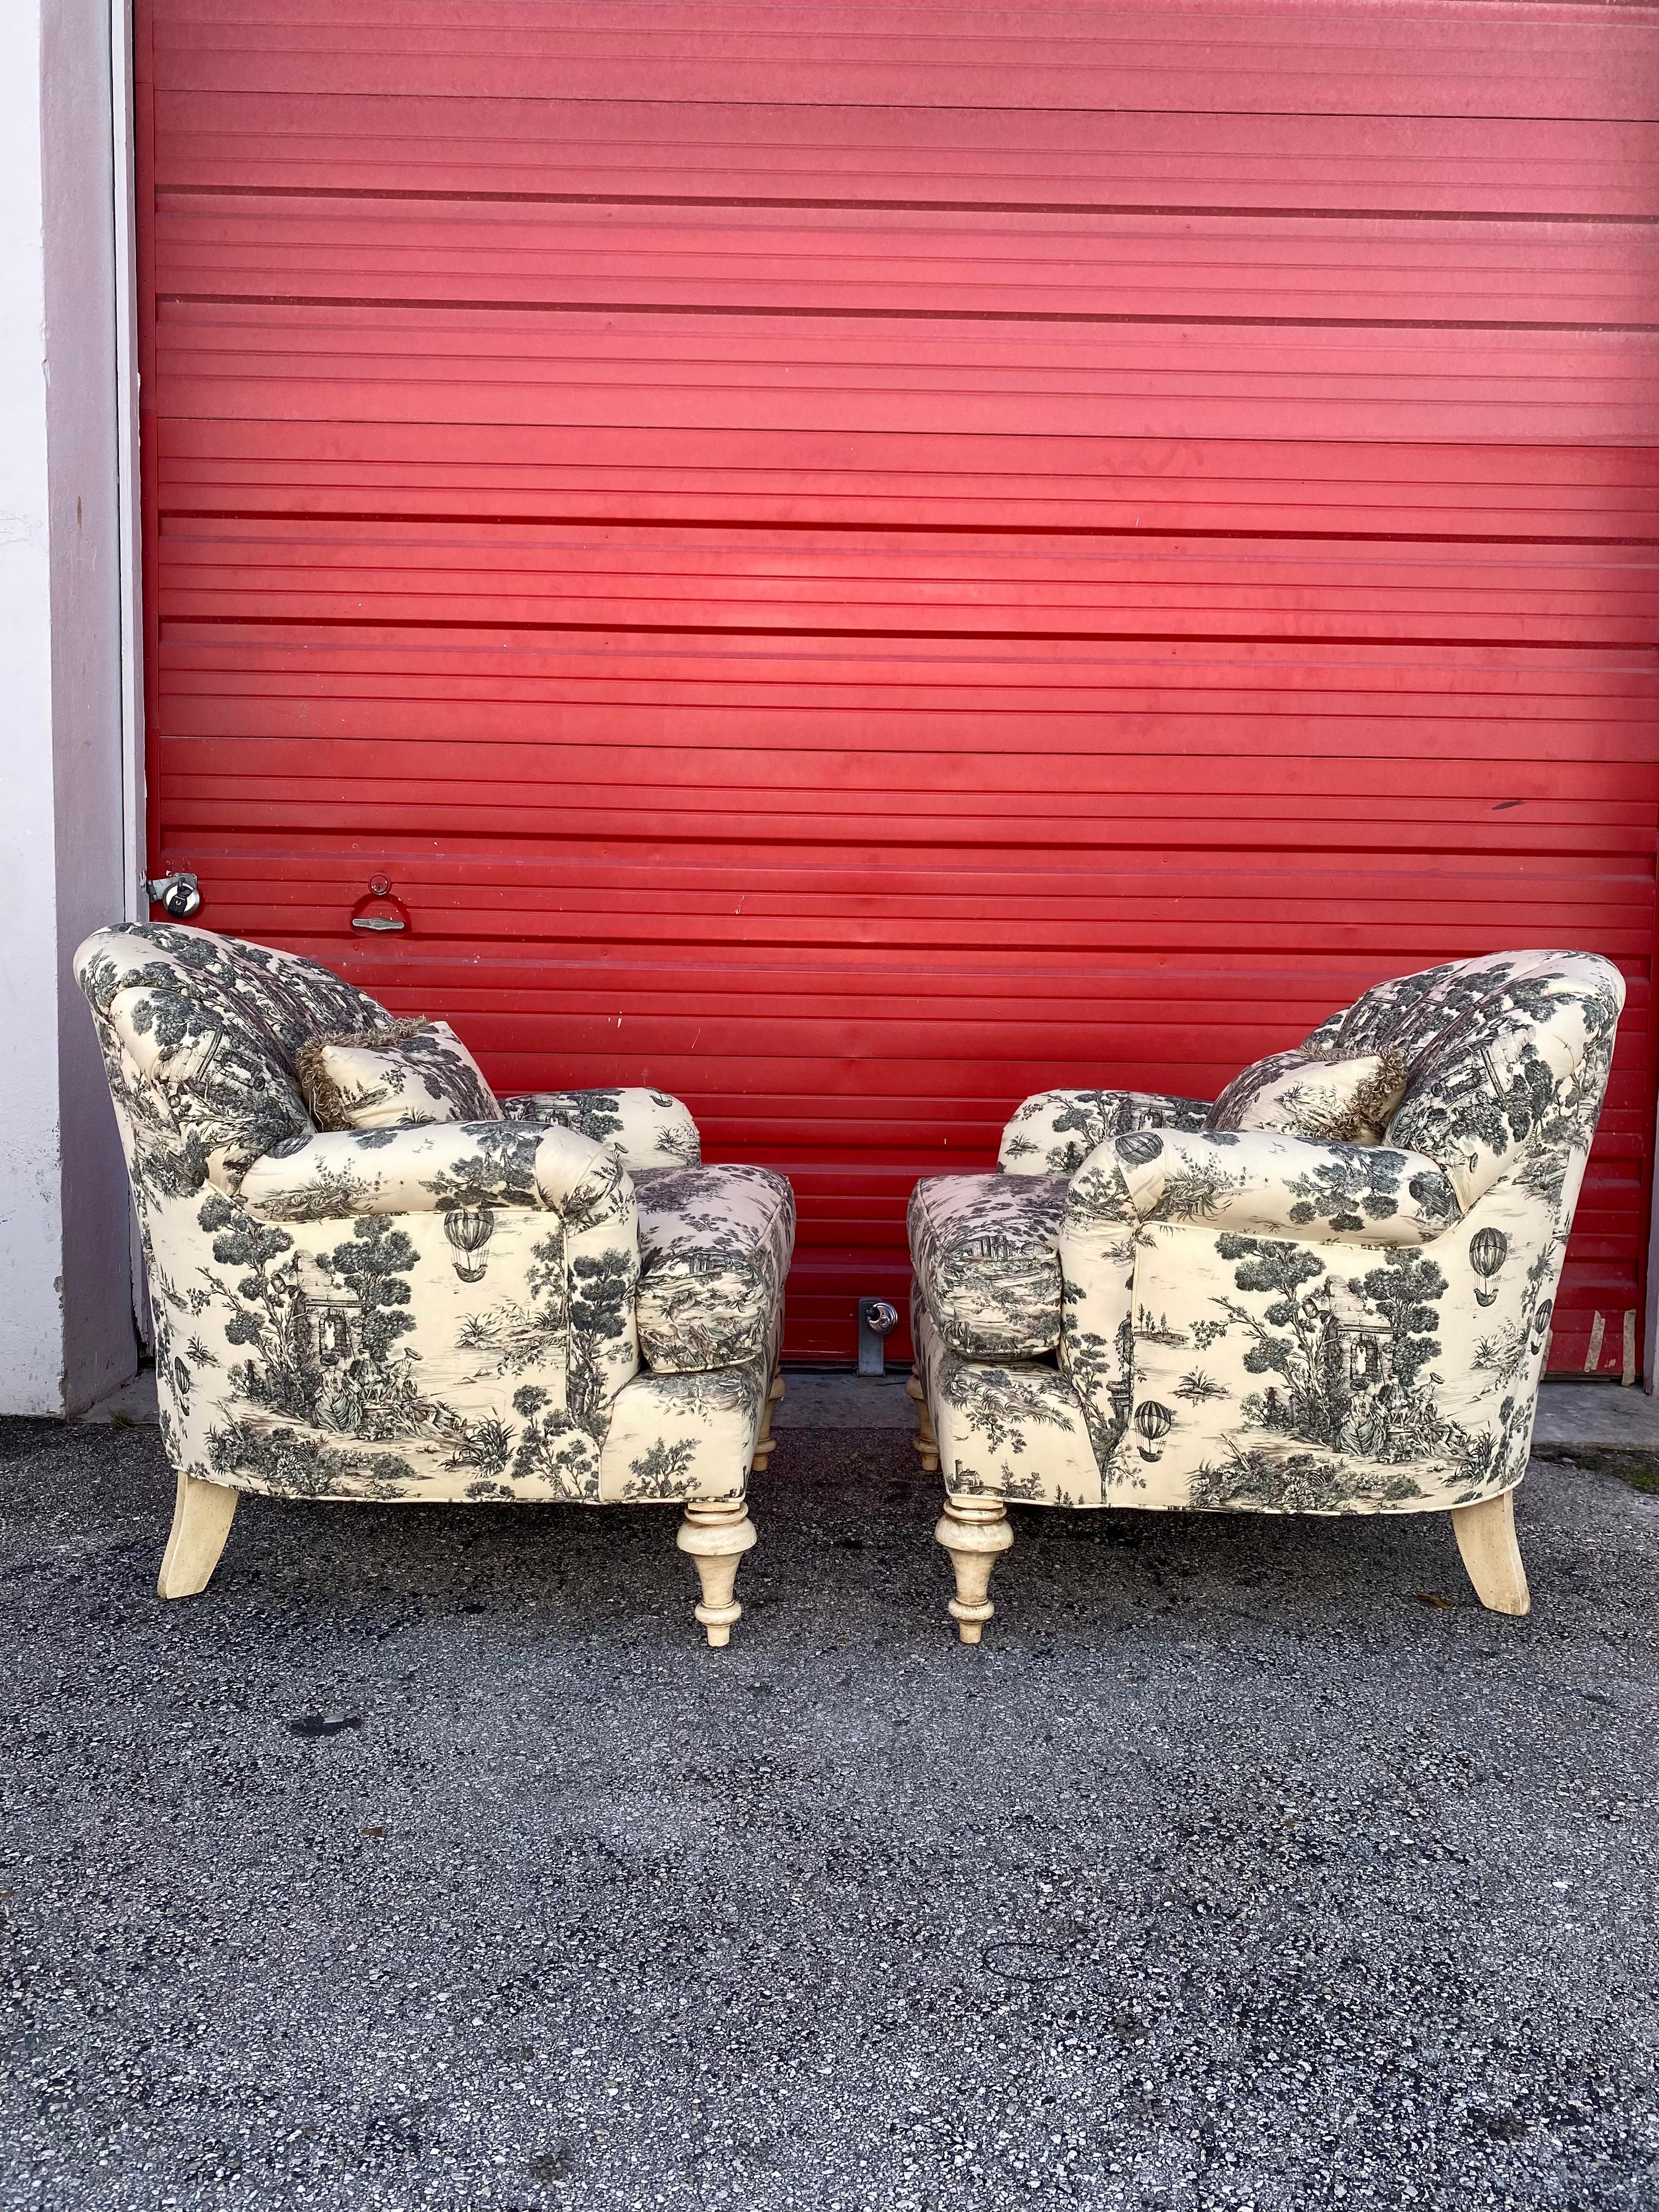 The beautiful special order collection is statement piece which is also extremely comfortable and packed with personality! We are delighted to offer for sale this absolutely stunning, Chinoiserie design fabric with signature English armchairs. Just